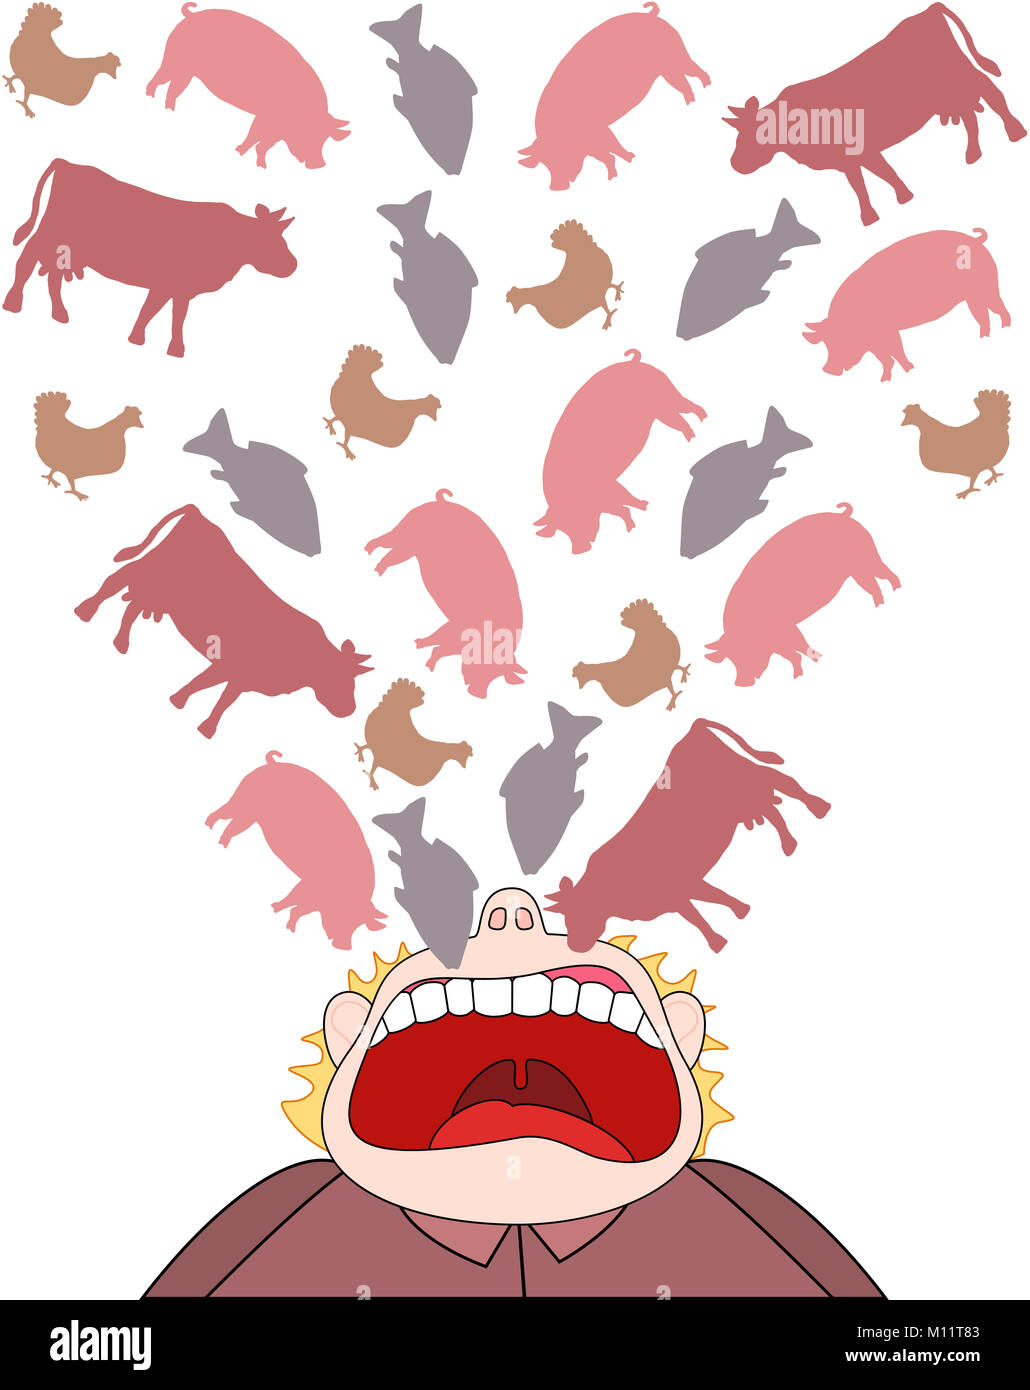 Meat consumption - symbolic comic illustration of a man who eats beef, pork, chicken and fish - unhealthy diet instead of vegetarian or vegan food. Stock Photo